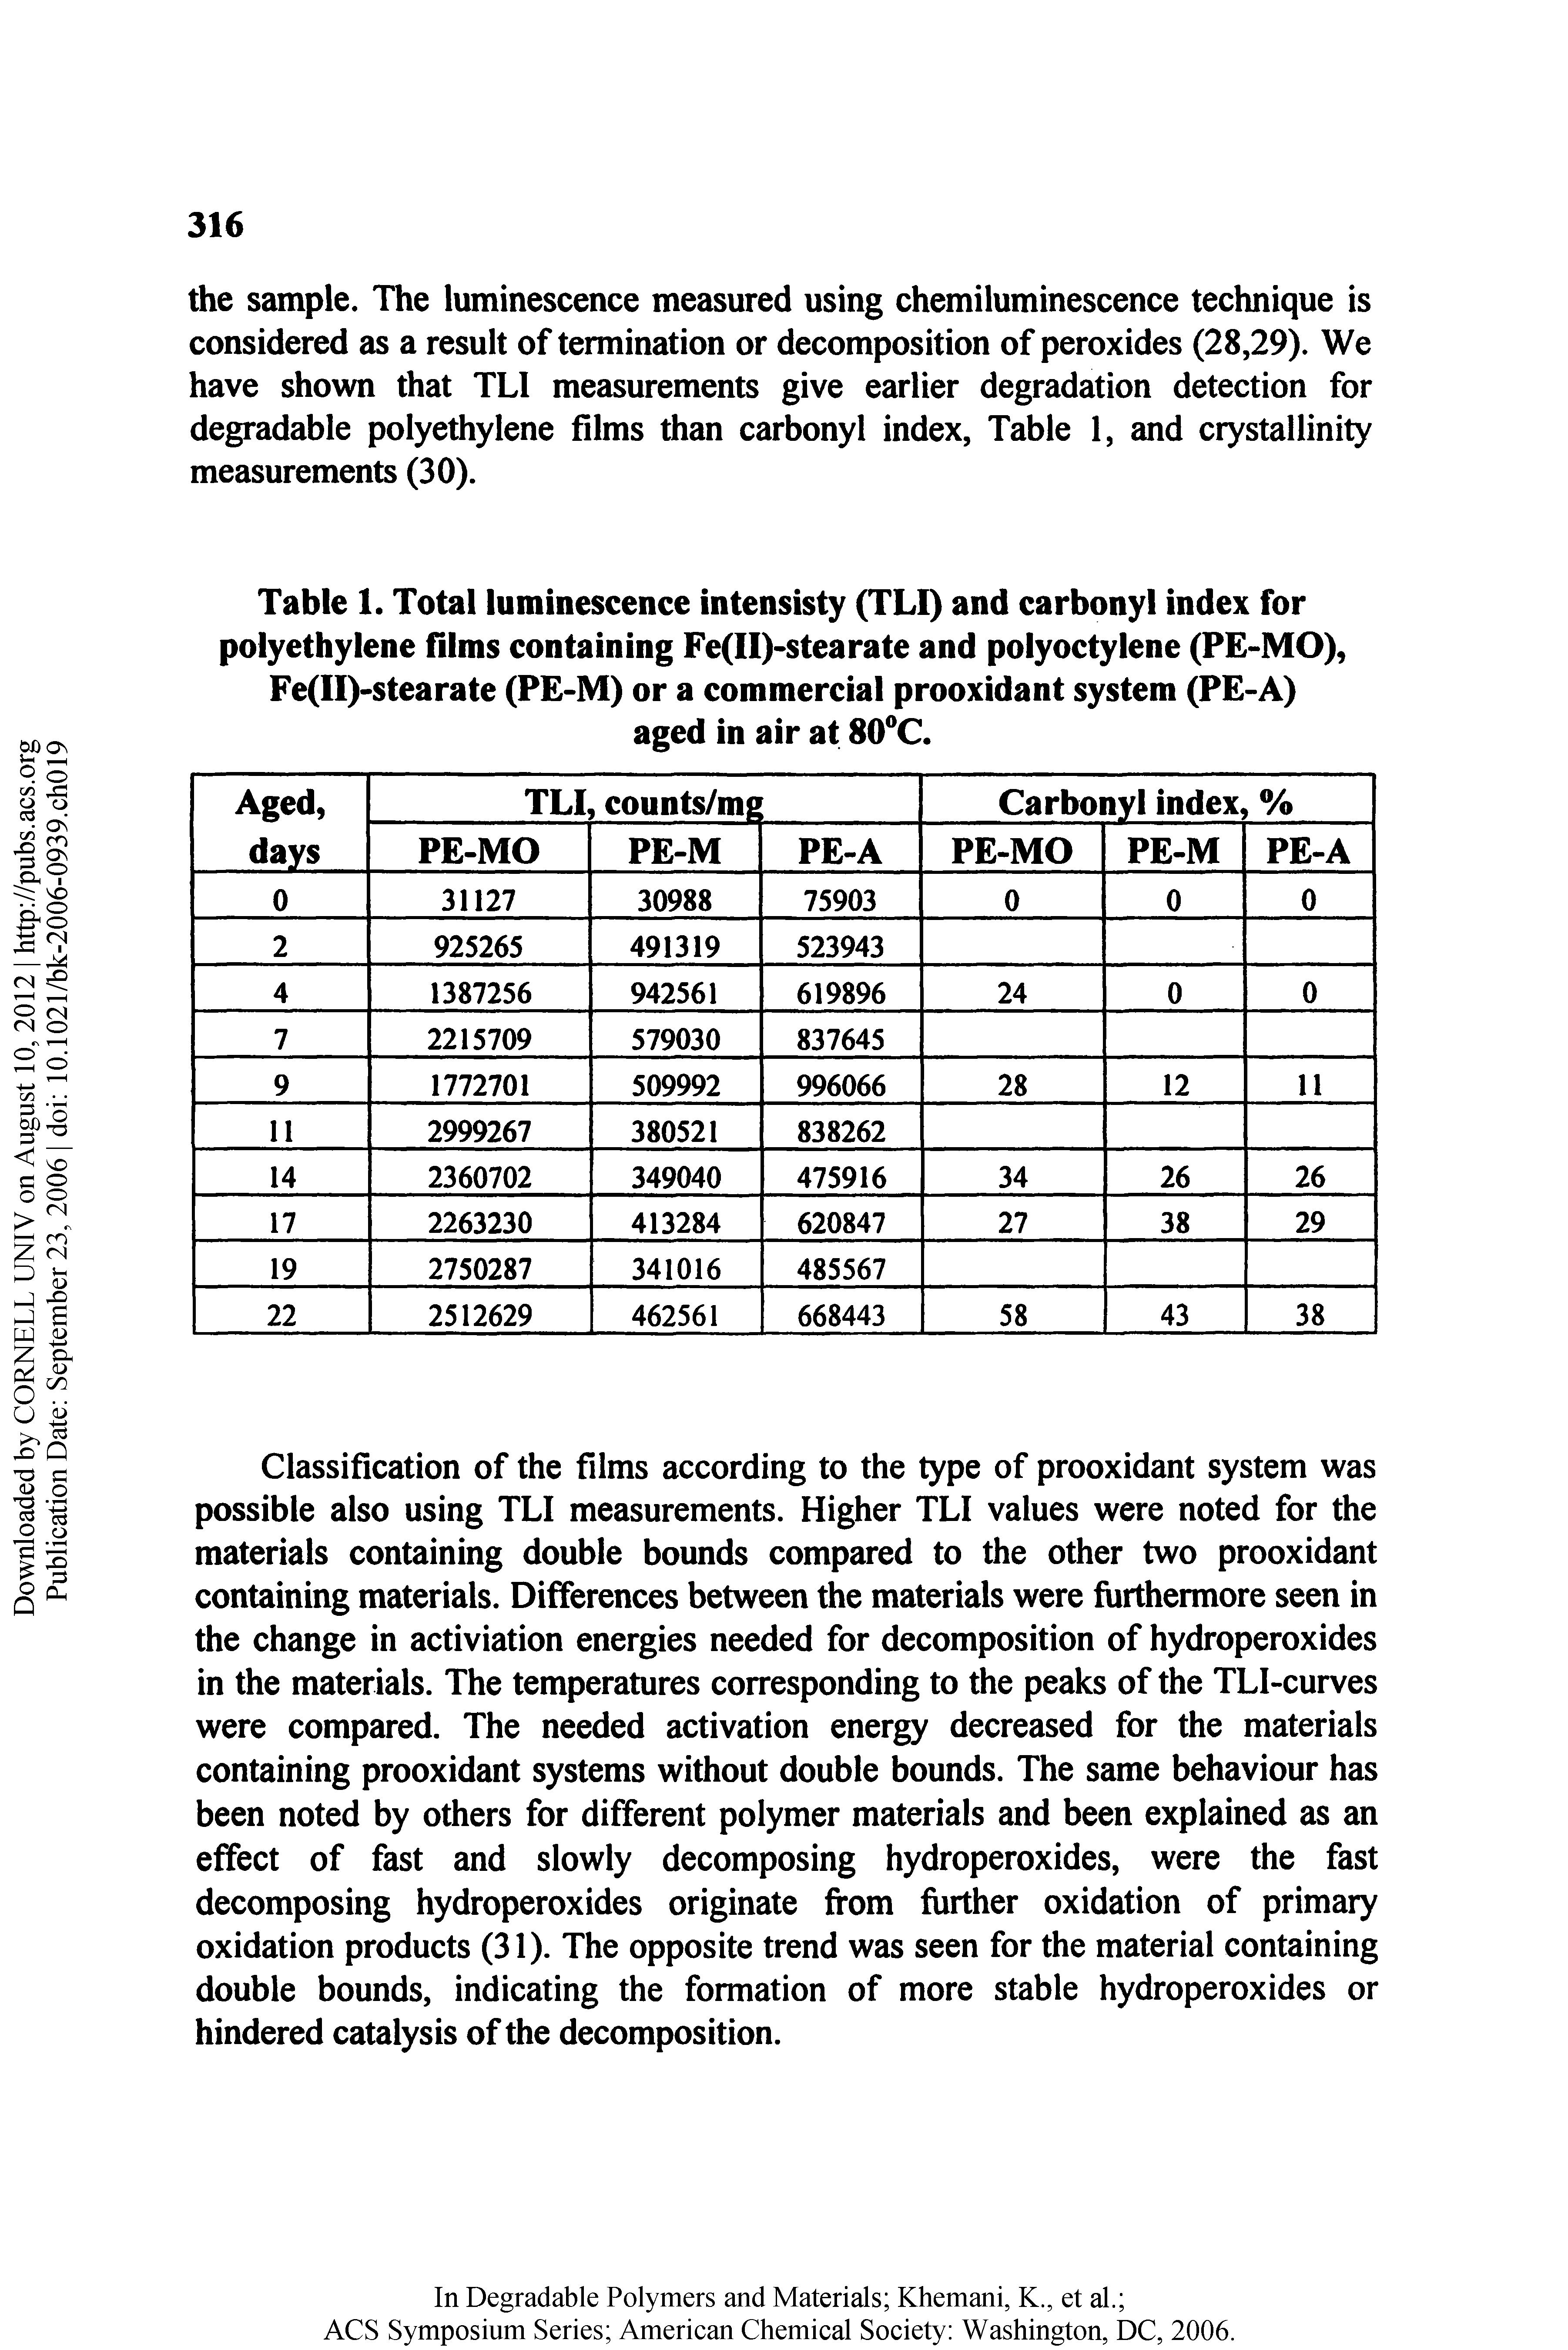 Table 1. Total luminescence intensisty (TLl) and carbonyl index for polyethylene films containing Fe(Il)-stearate and polyoctylene (PE-MO), Fe(ll)-stearate (PE-M) or a commercial prooxidant system (PE-A) aged in air at 80 C.